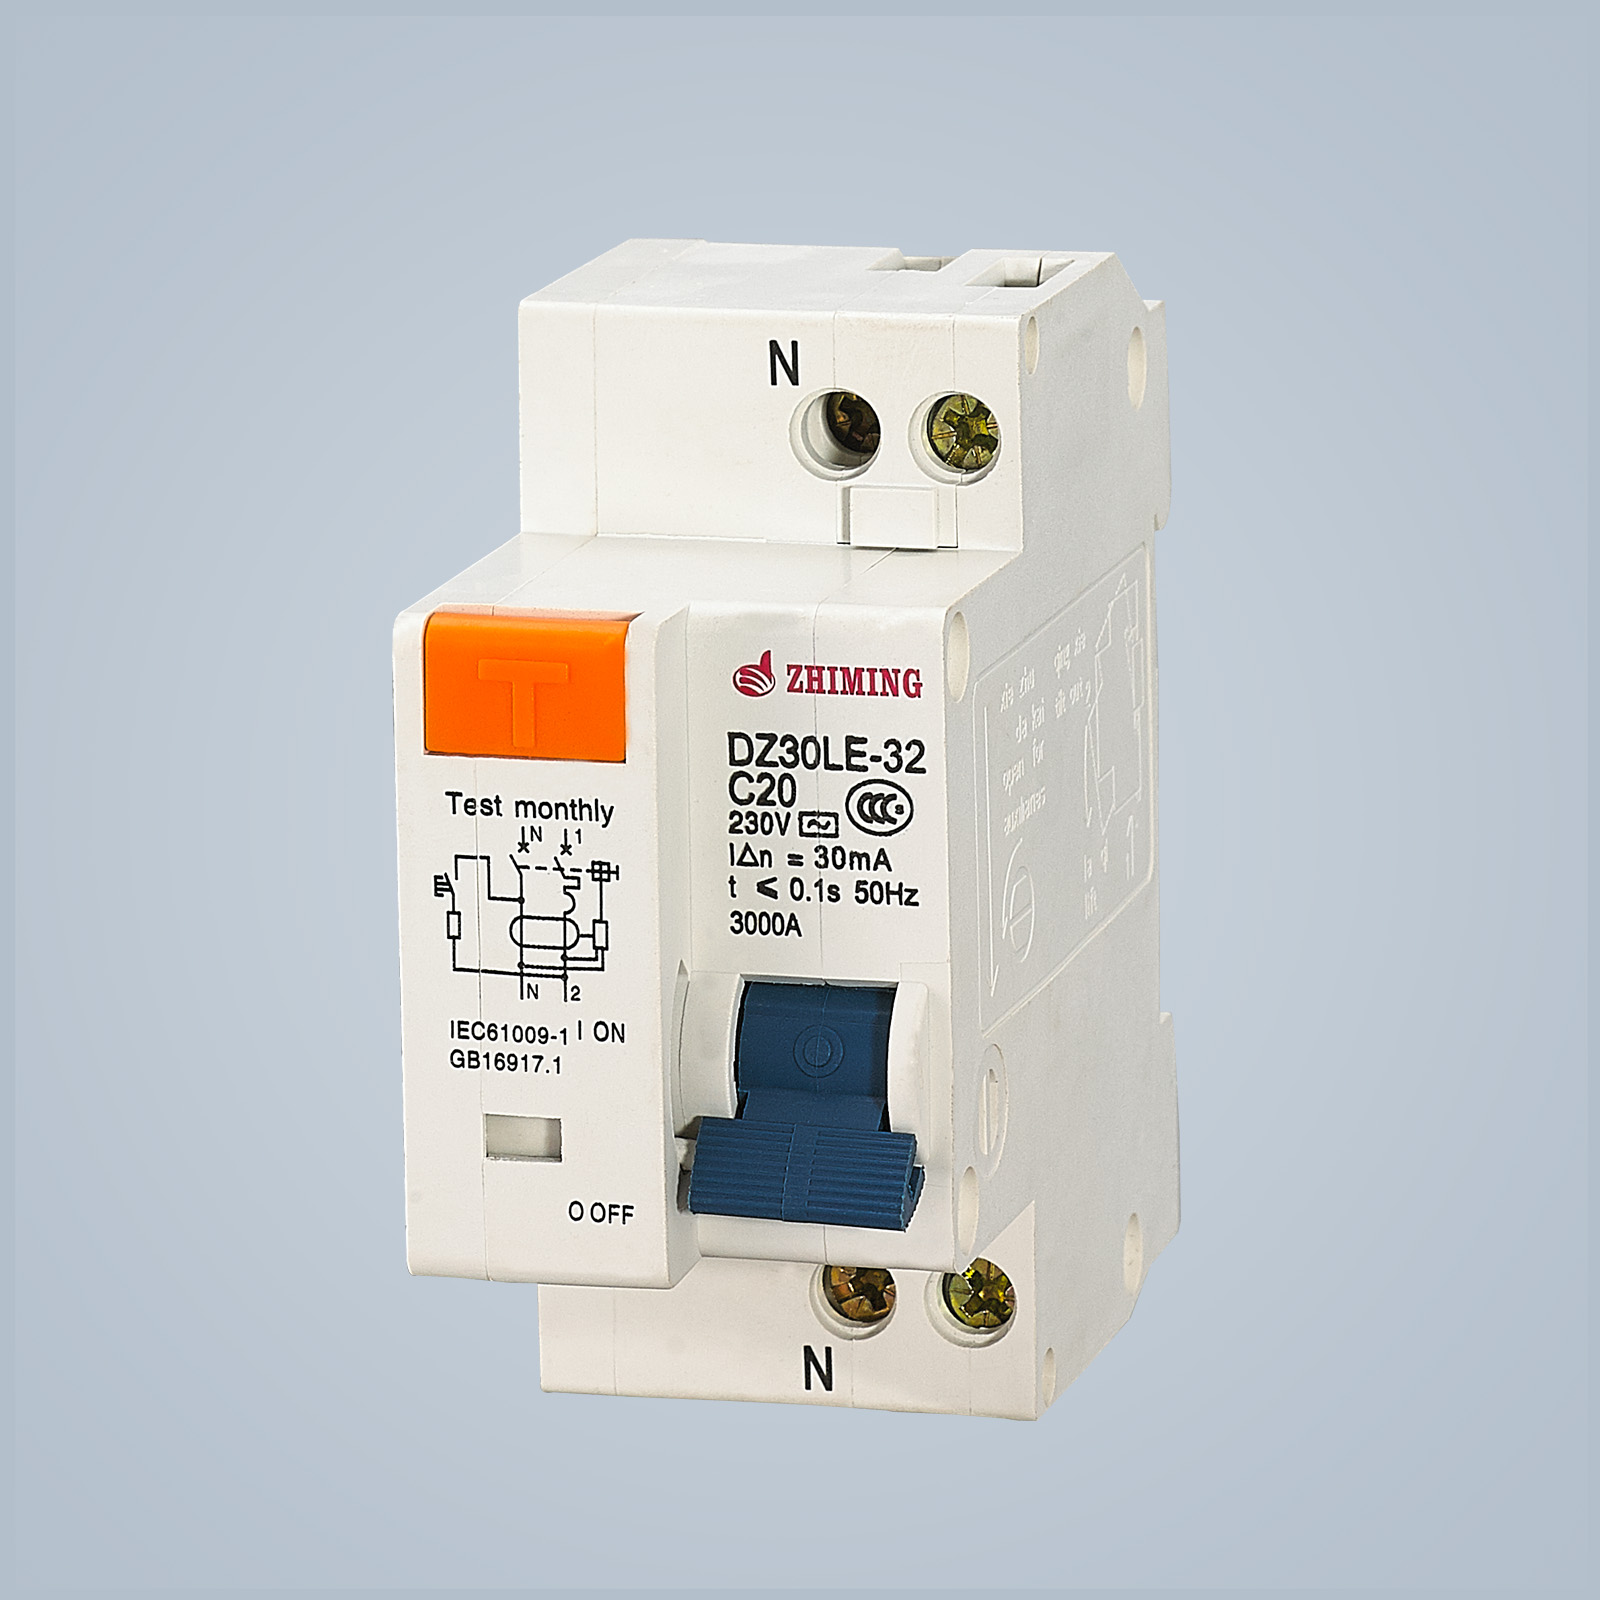 DZ30LE-32 Residual Current Operated Circuit Breaker